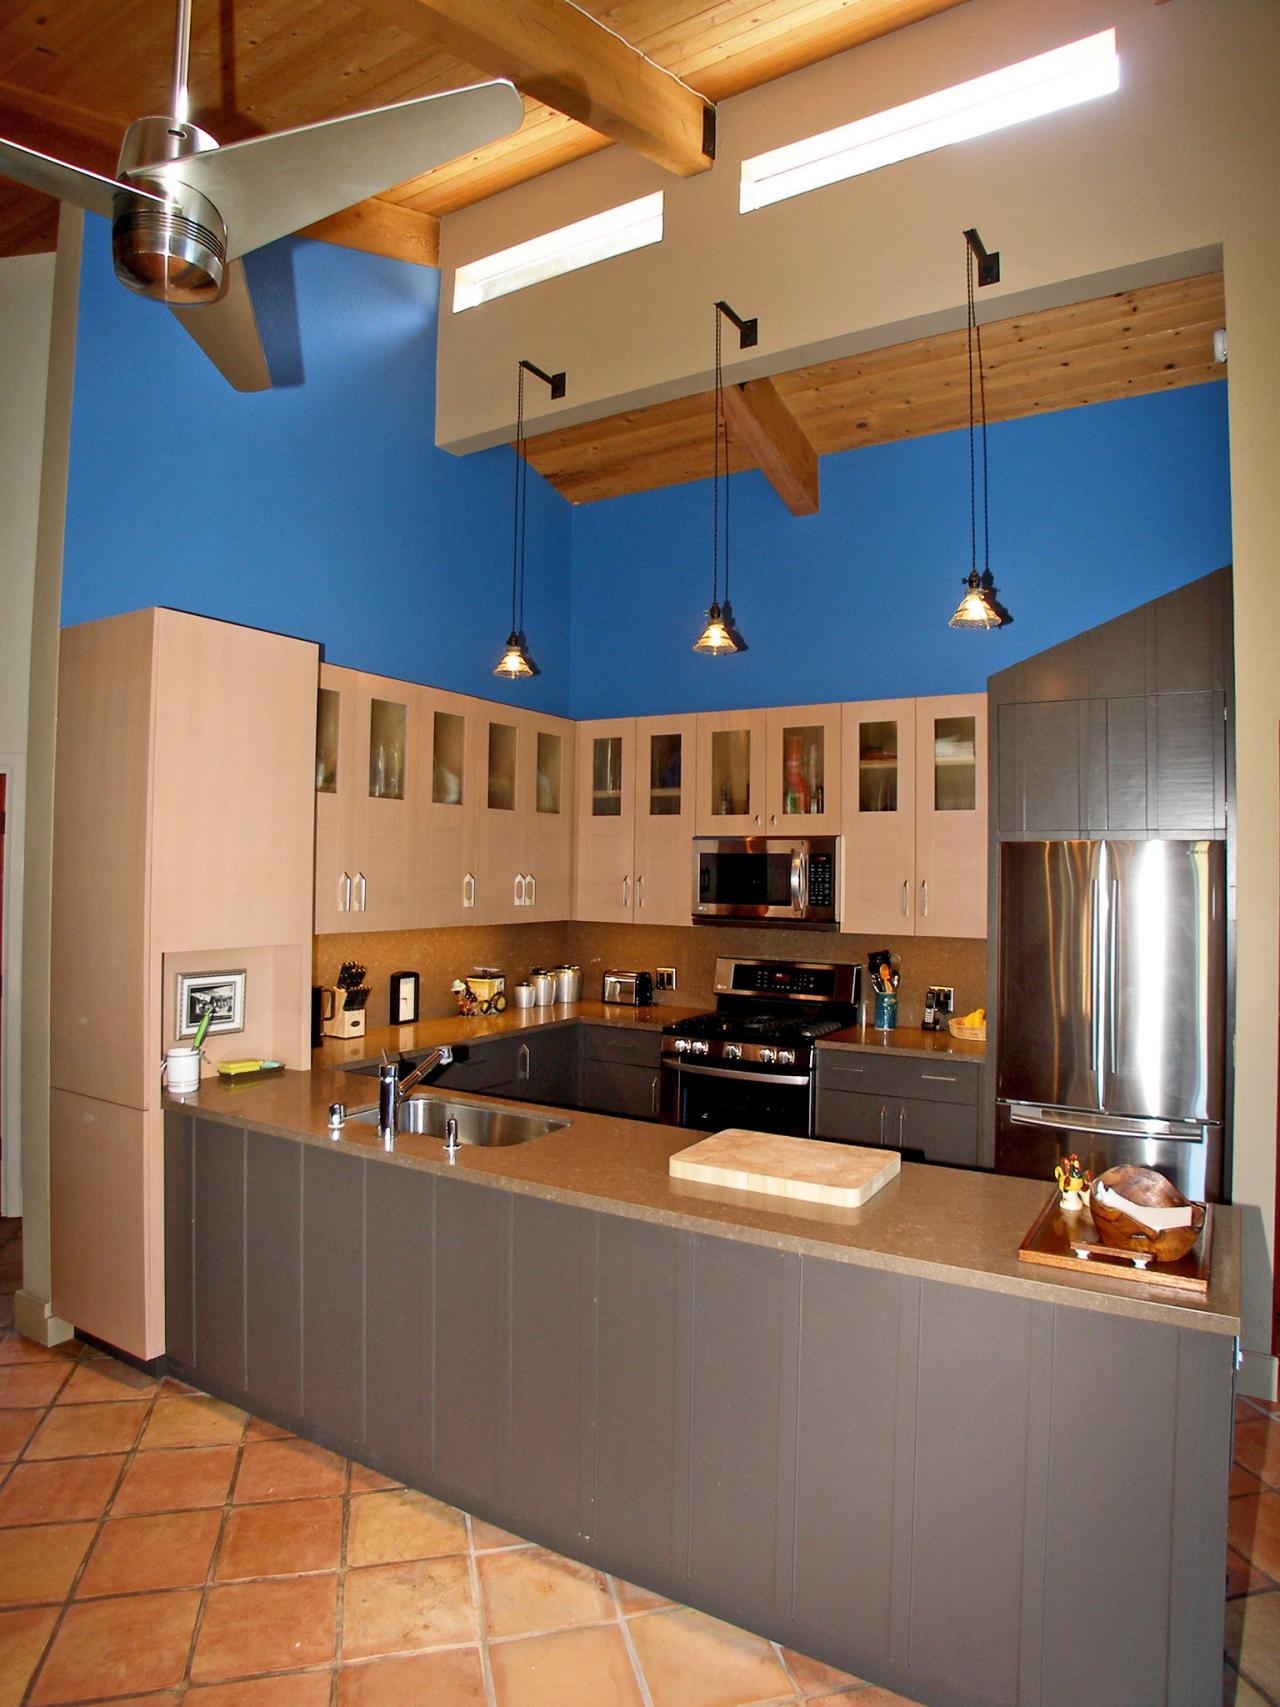 Best Colors To Paint A Kitchen Pictures Ideas From HGTV HGTV